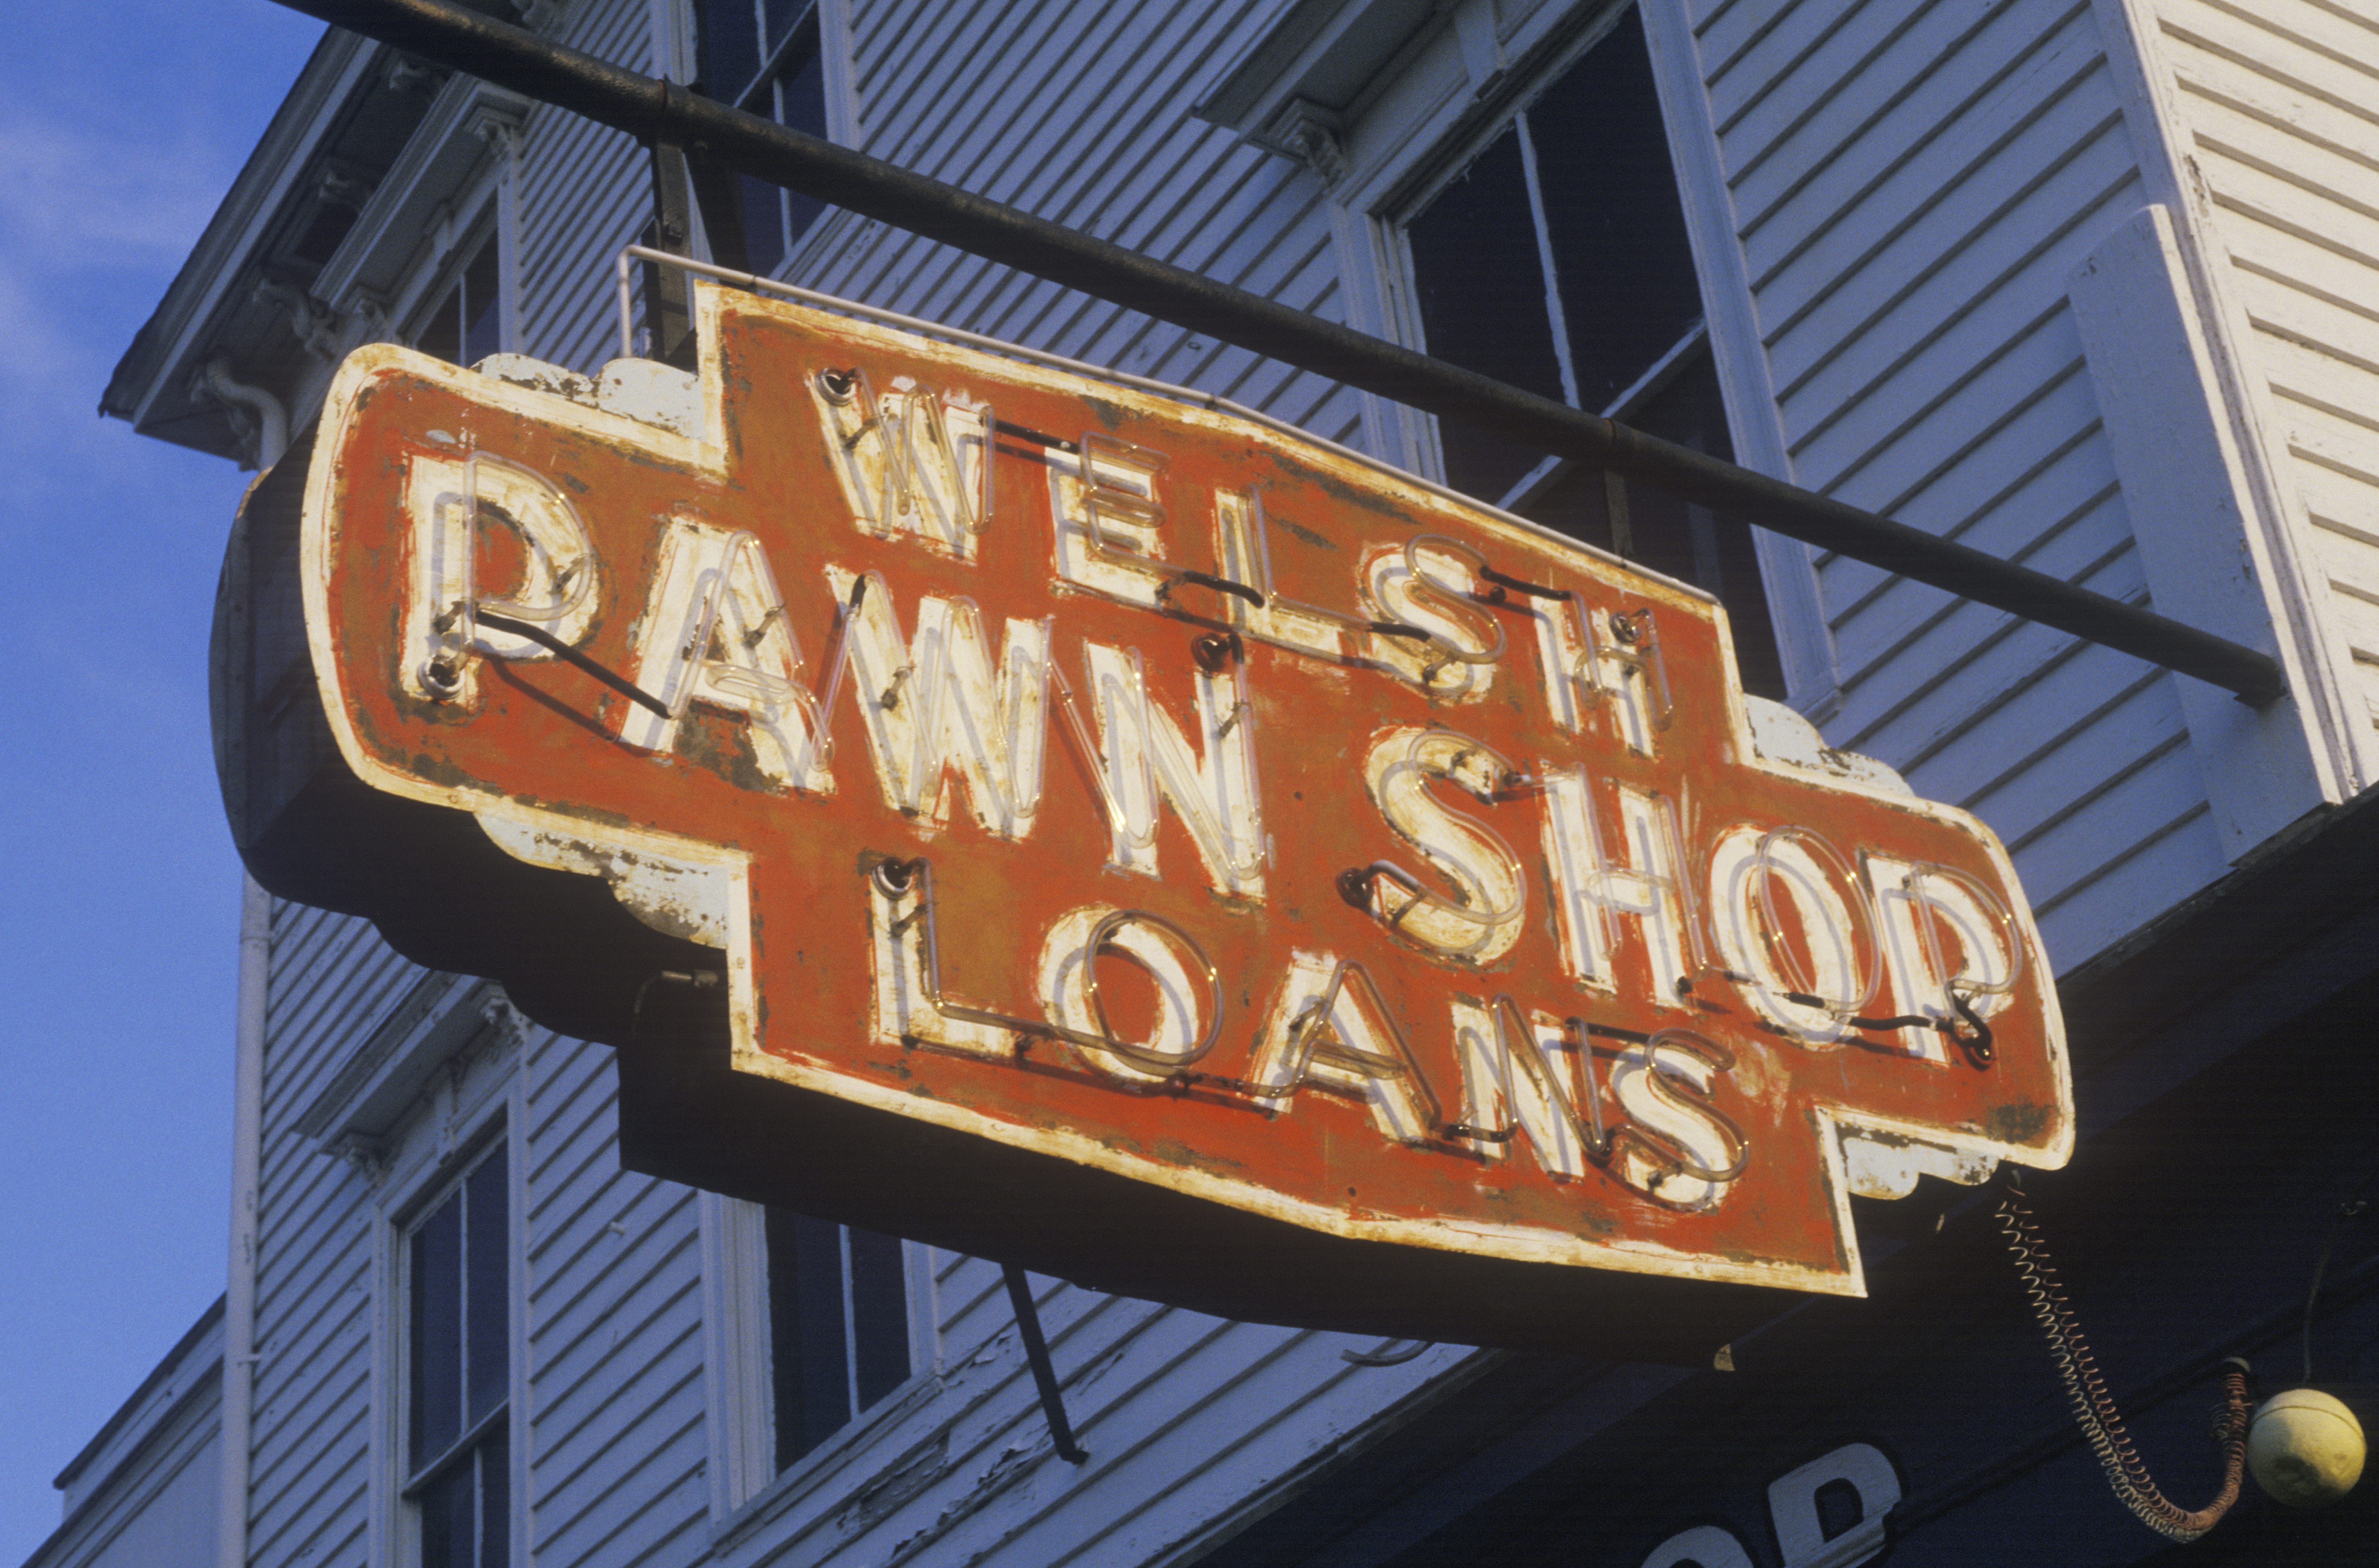 Why Millennials Are Tapping Payday Loans and Pawn Shops